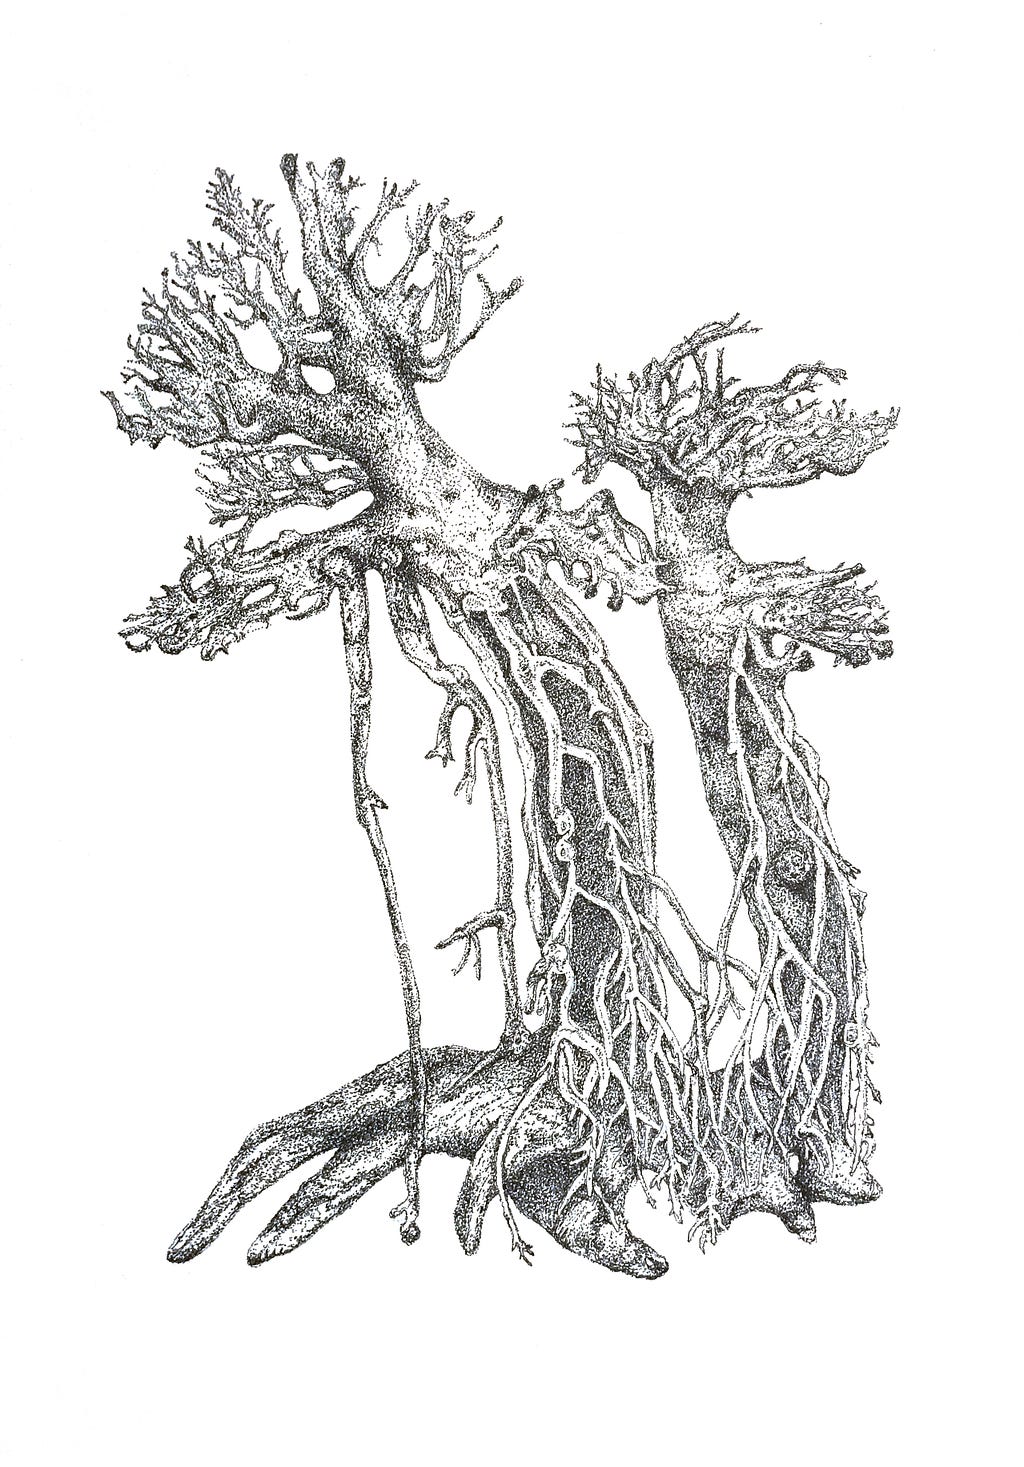 black and white drawing, consisting of thousands of dots, of driftwood roots